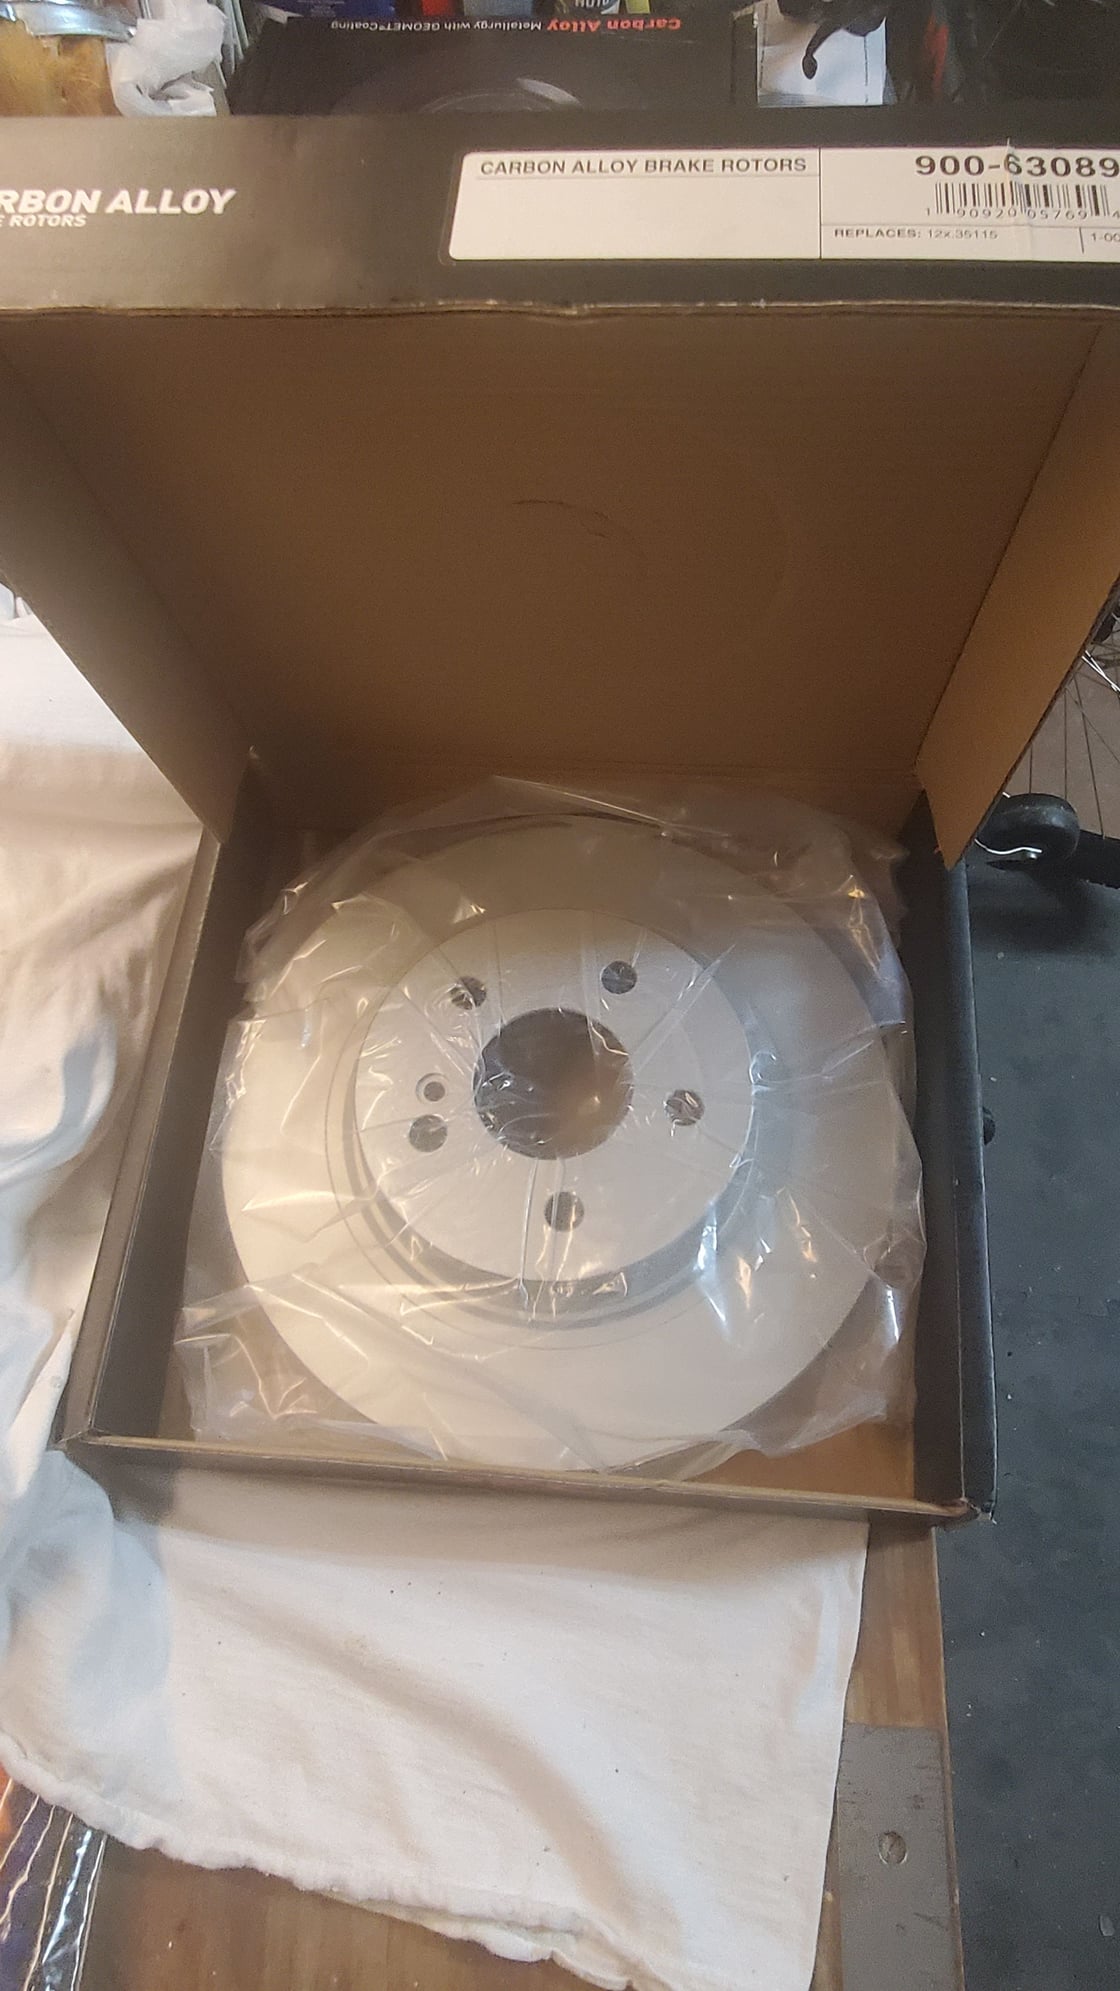 2014 Mercedes-Benz C250 - Rear DFC brake rotors and Akebono pads for 2014, C250 Sport - Brakes - $200 - Fort Lauderdale, FL 33325, United States